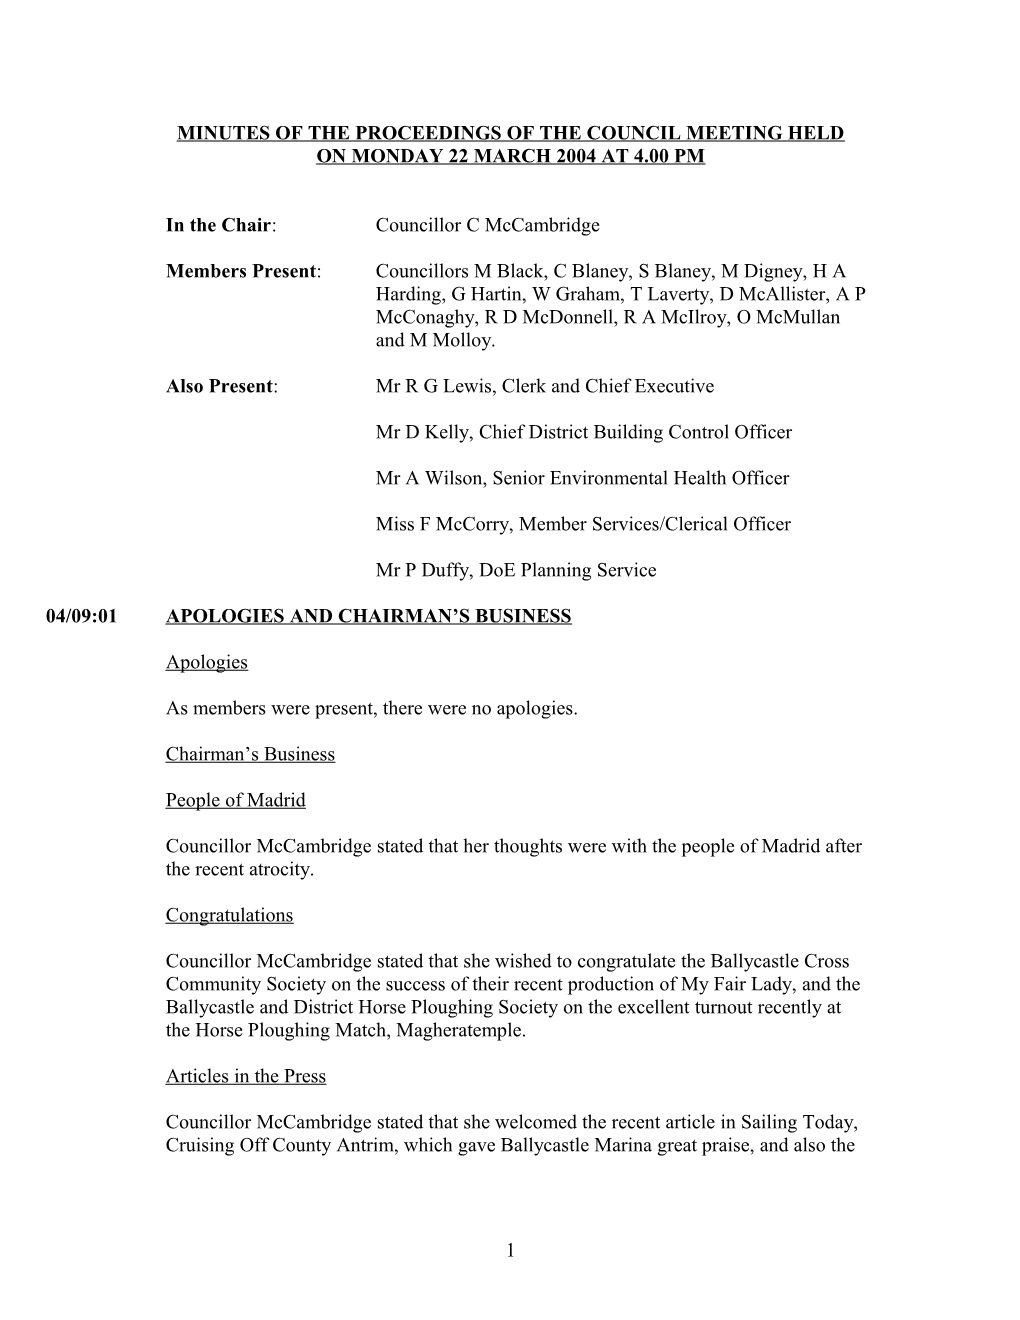 Minutes of the Proceedings of the Council Meeting Held s9